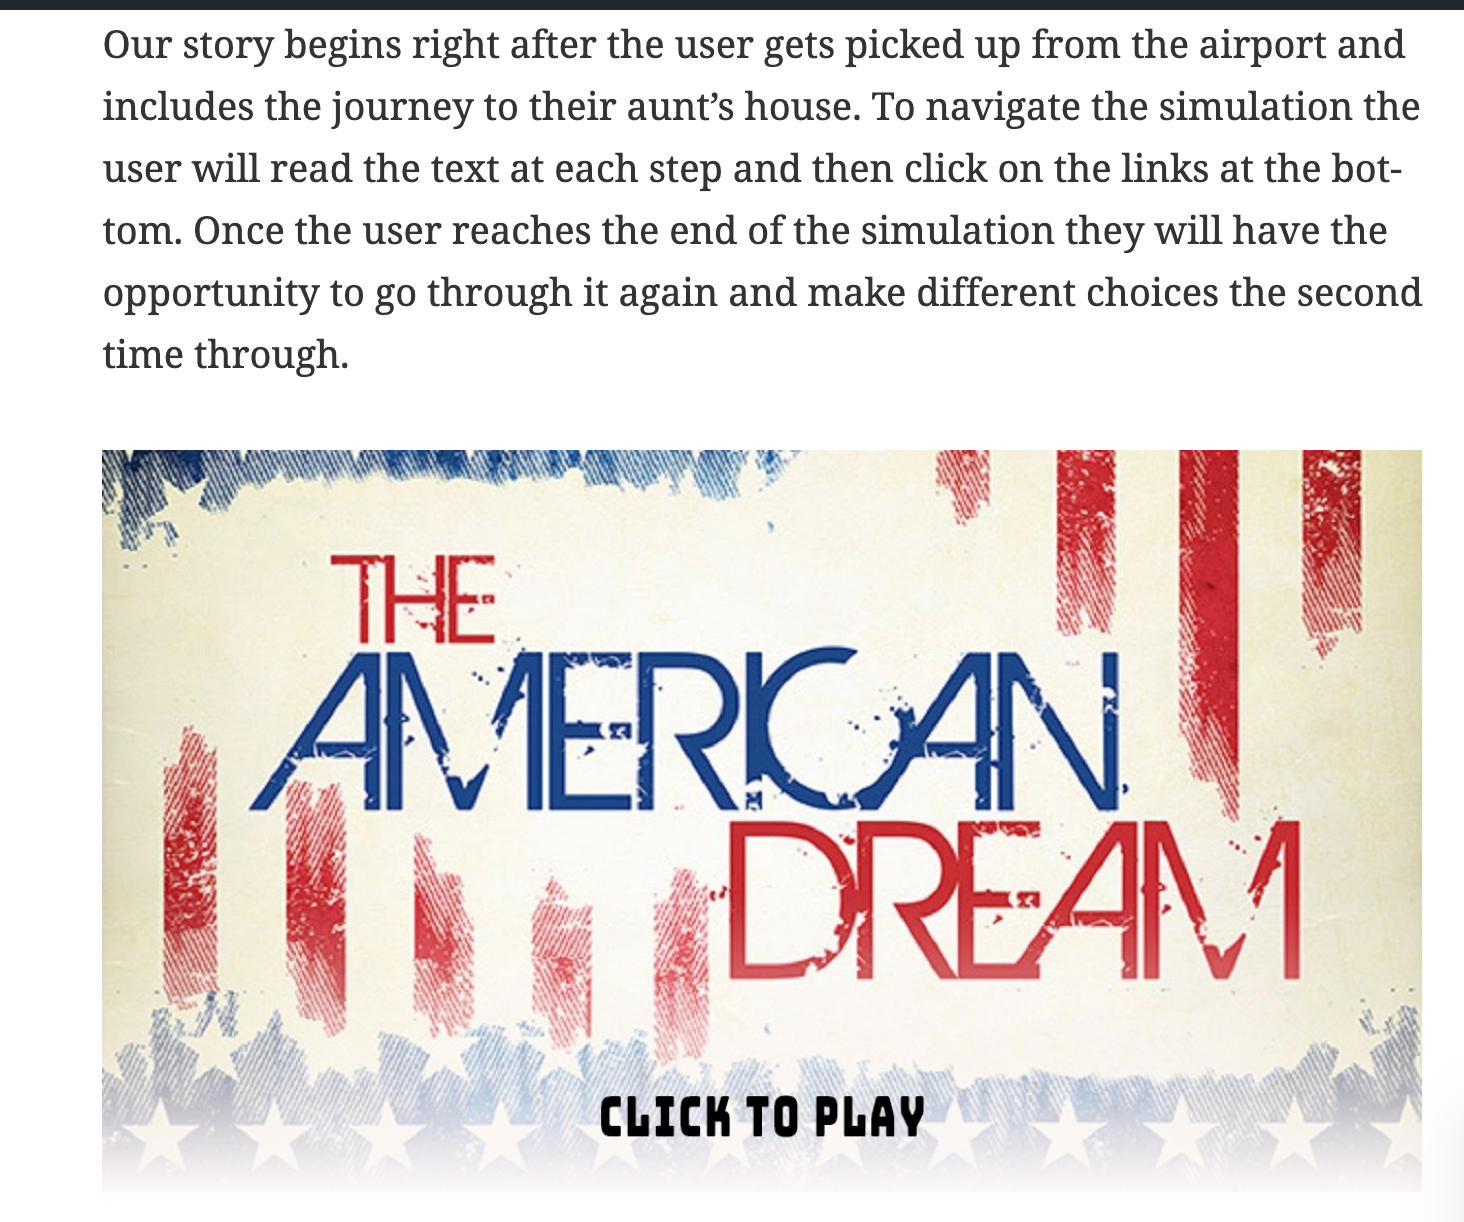 "Click to Play" panel displays below this text: “Our story begins right after the user gets picked up from the airport and includes the journey to their aunt's house.”